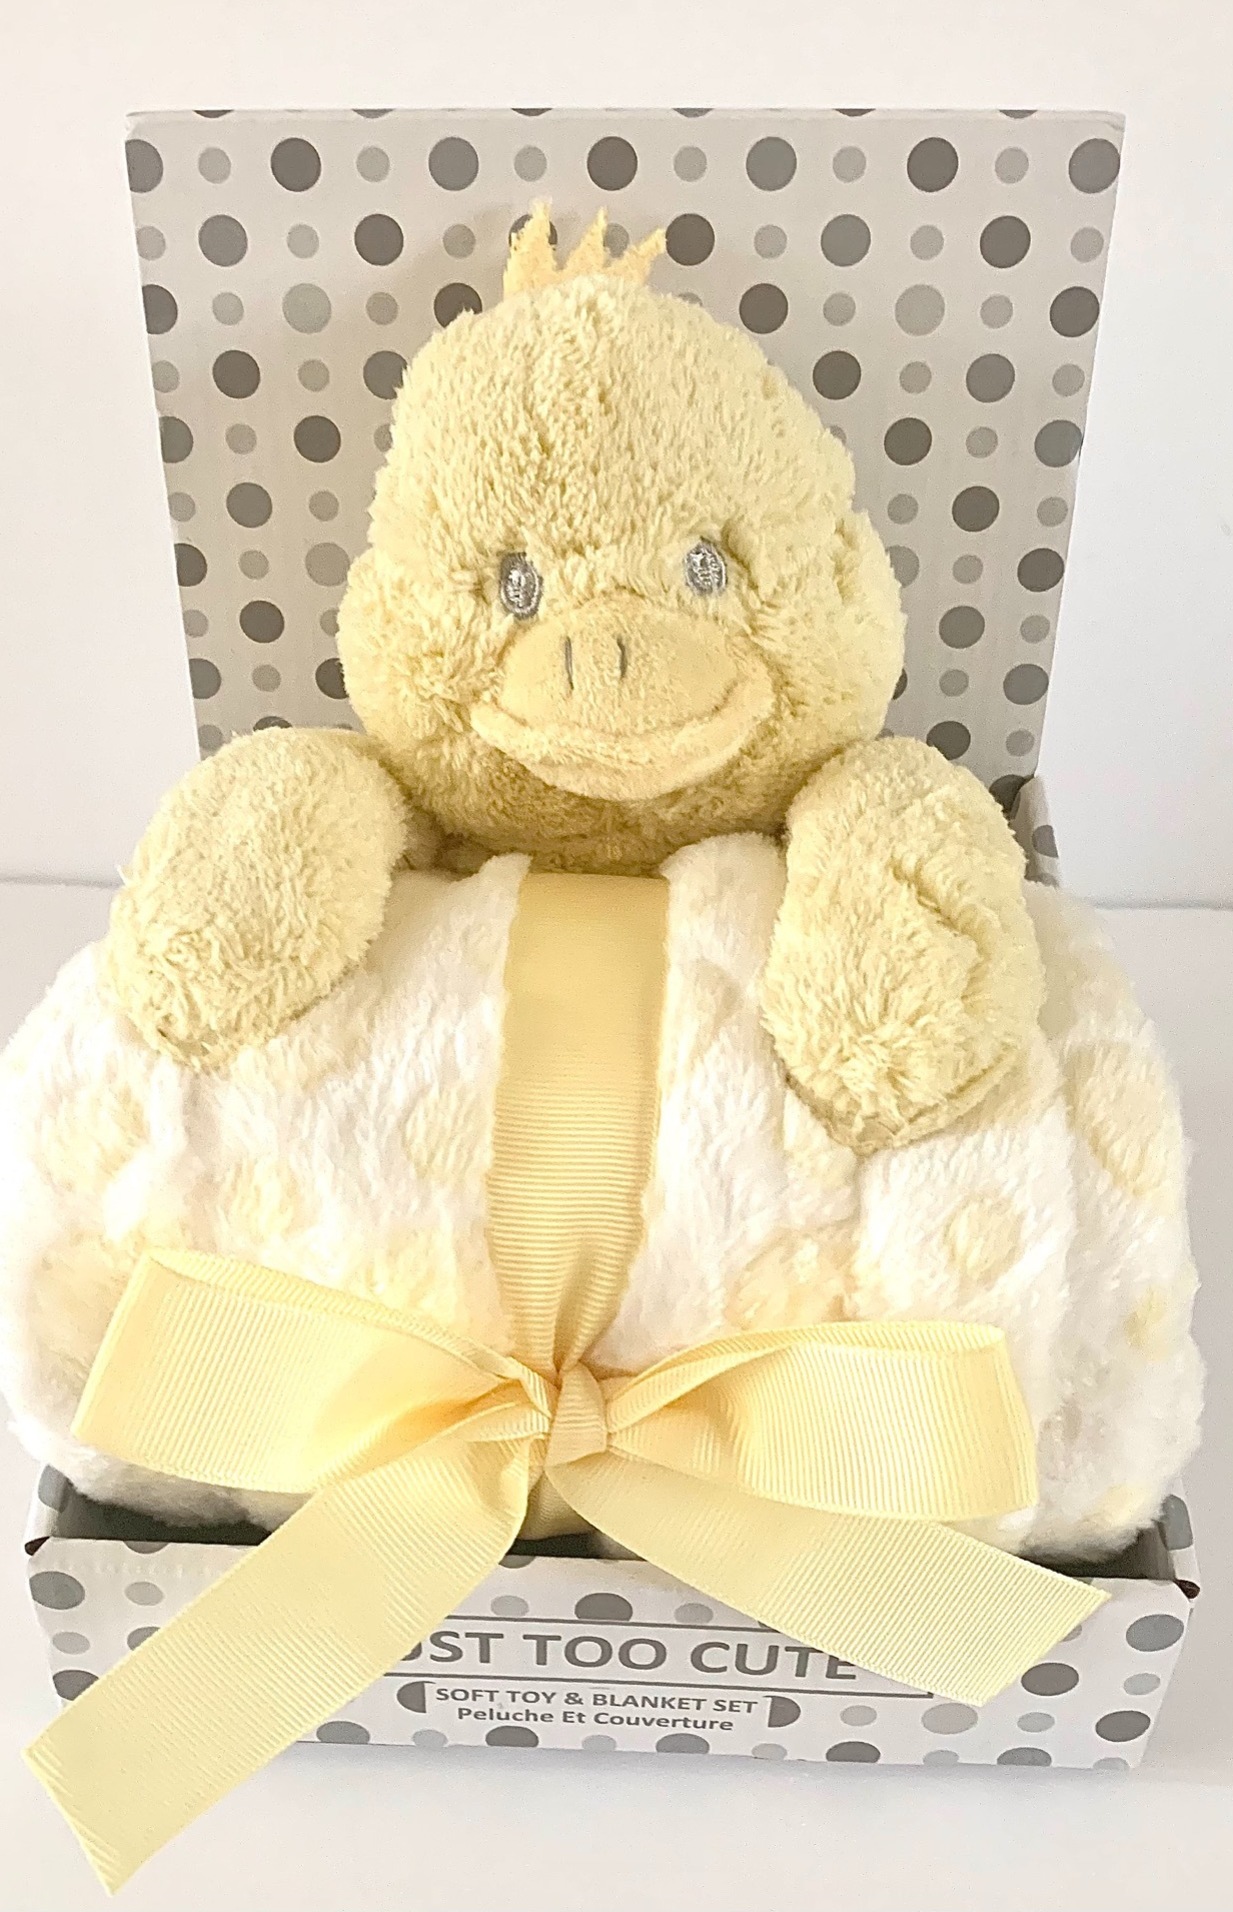 Duck soft toy and baby blanket gift set